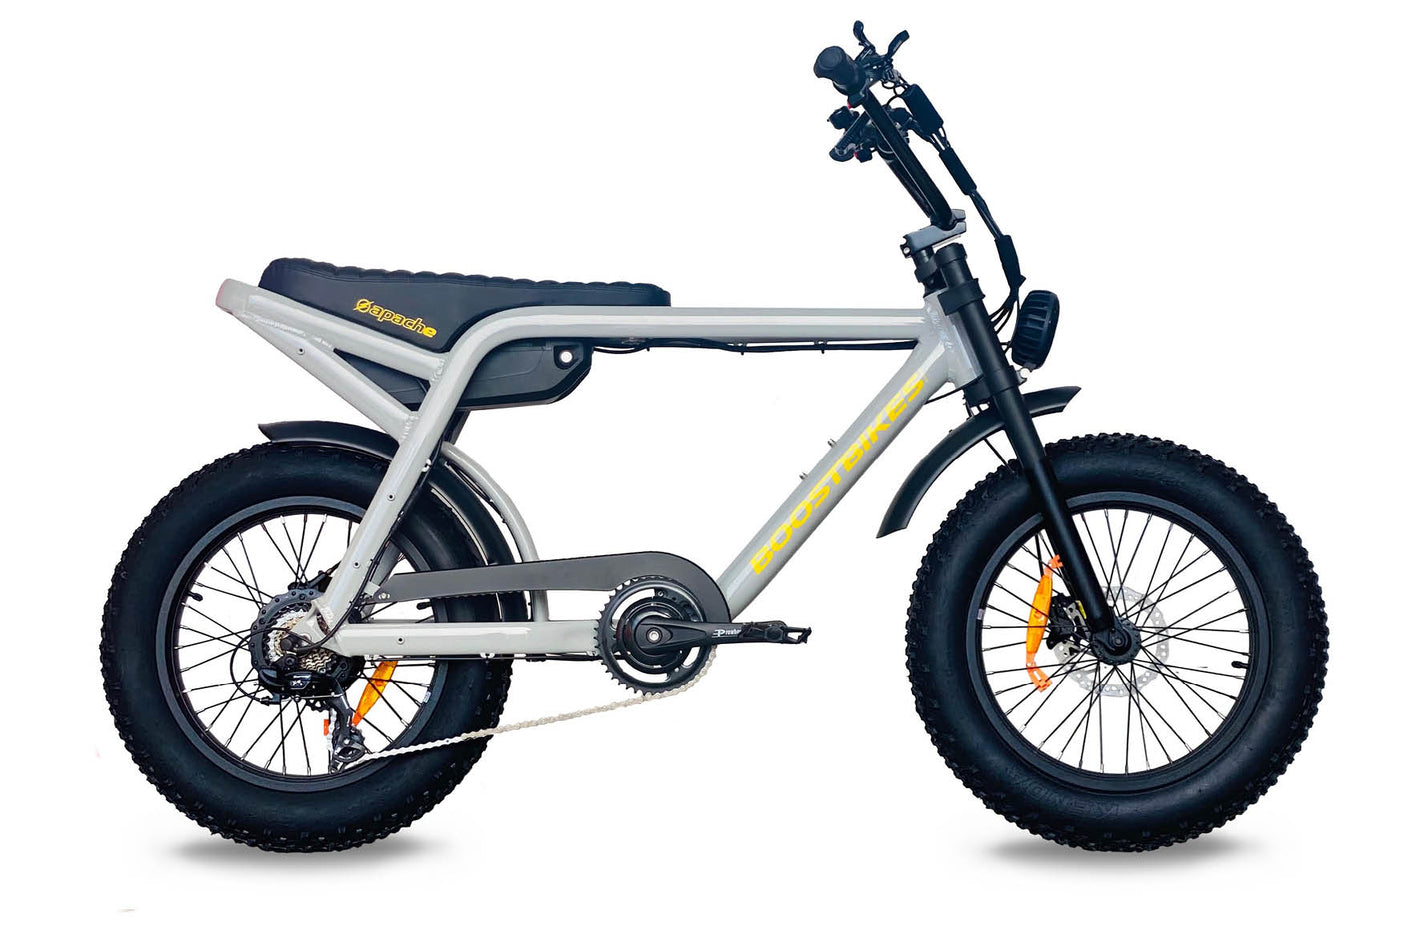 Apache Electric Bike. This is a fast, cool, go anywhere bike with an awesome combination of fun performance and epic styling.